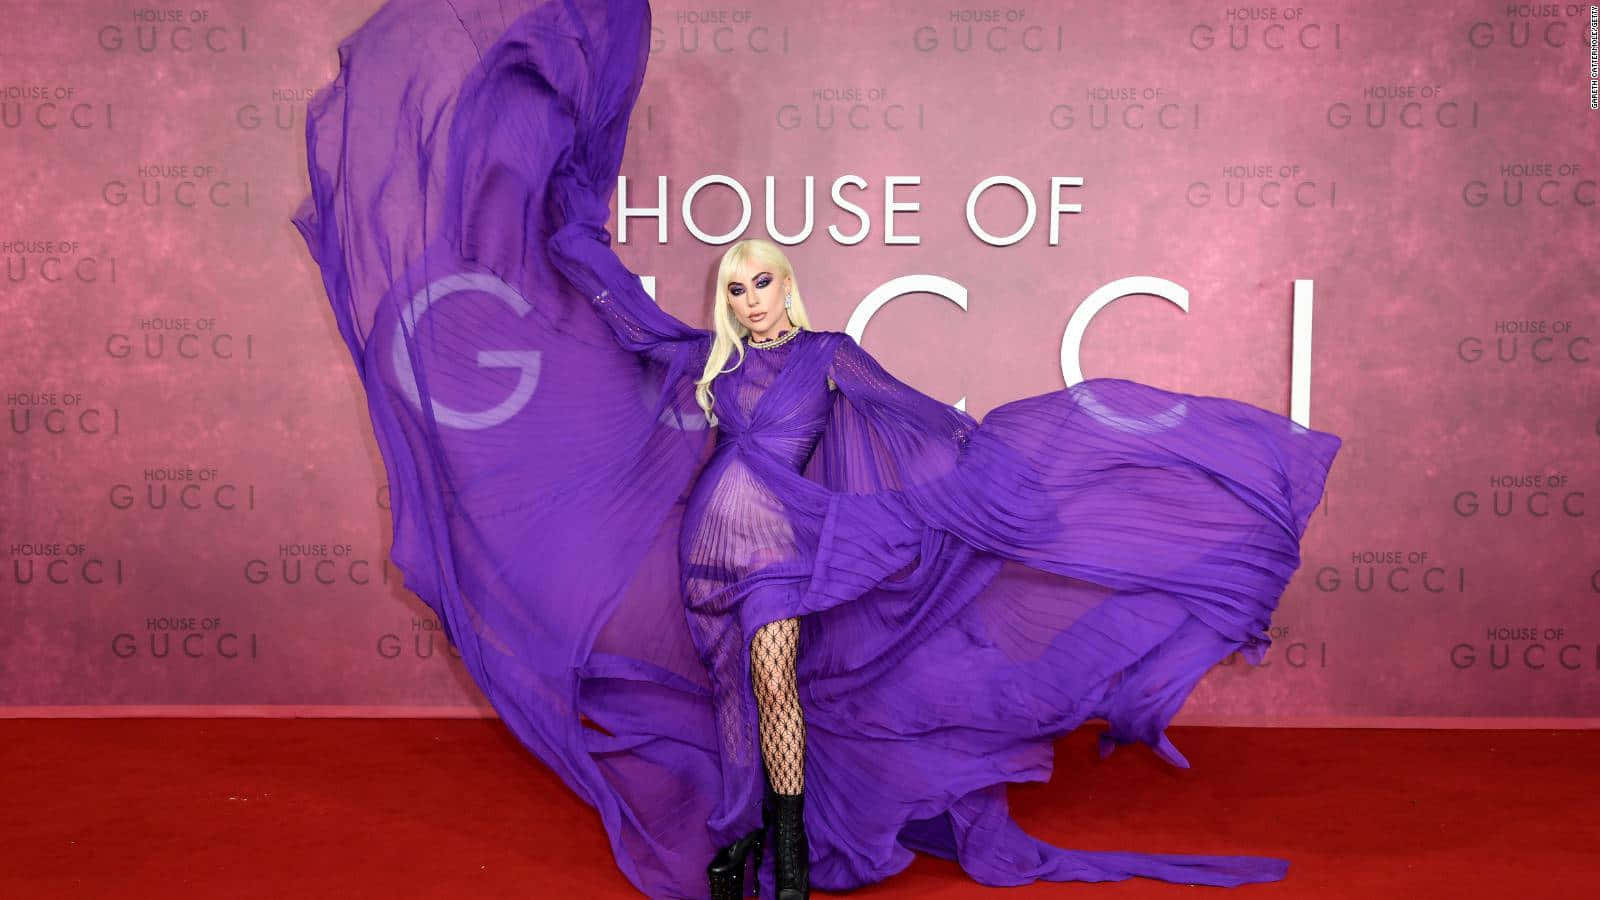 "Feel the luxury with this Purple Gucci ensemble" Wallpaper